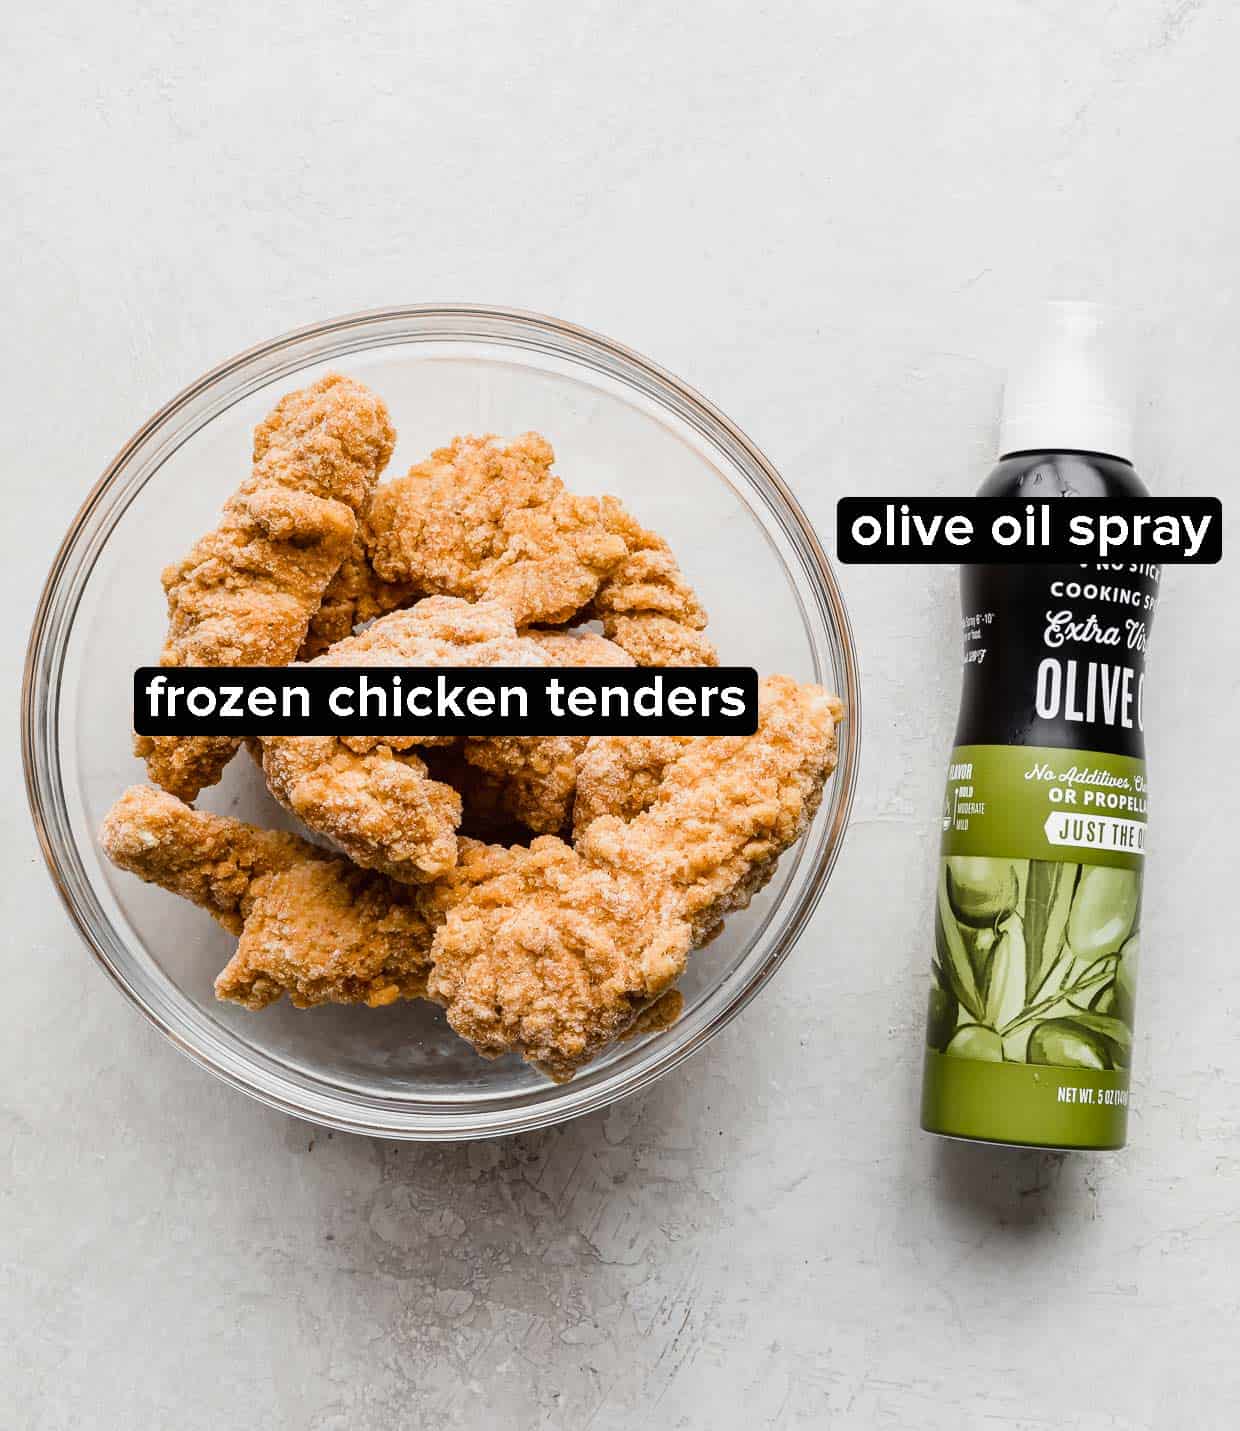 A glass bowl with frozen chicken tenders in it with a green bottle of olive oil spray next to it.